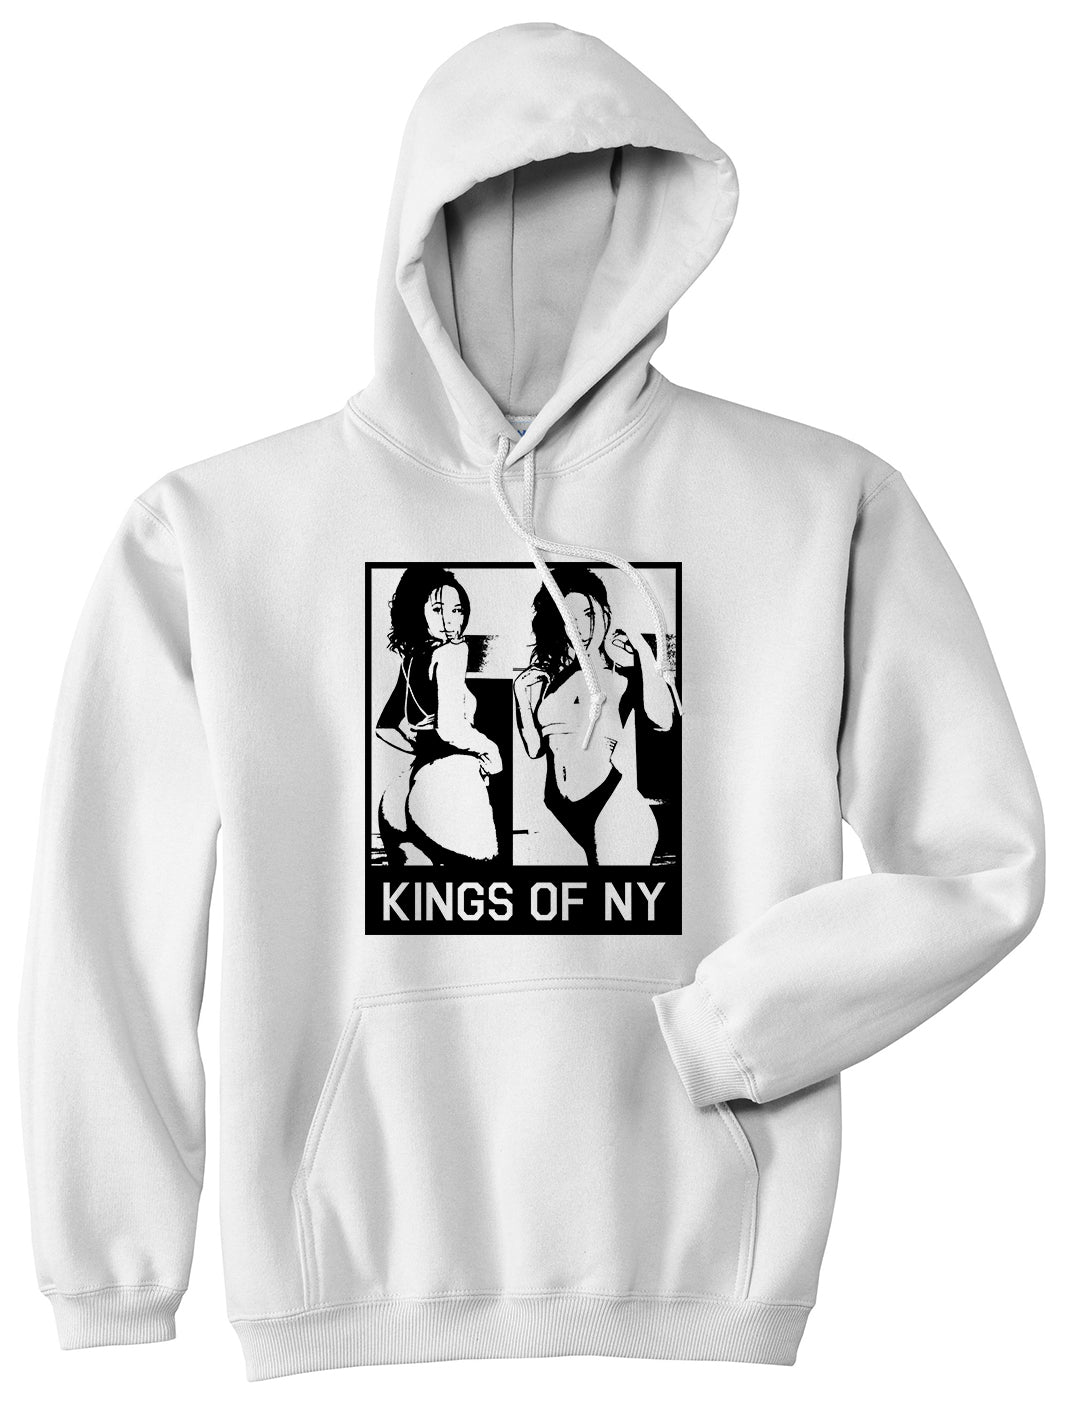 Slide In Her DMs Pullover Hoodie in White